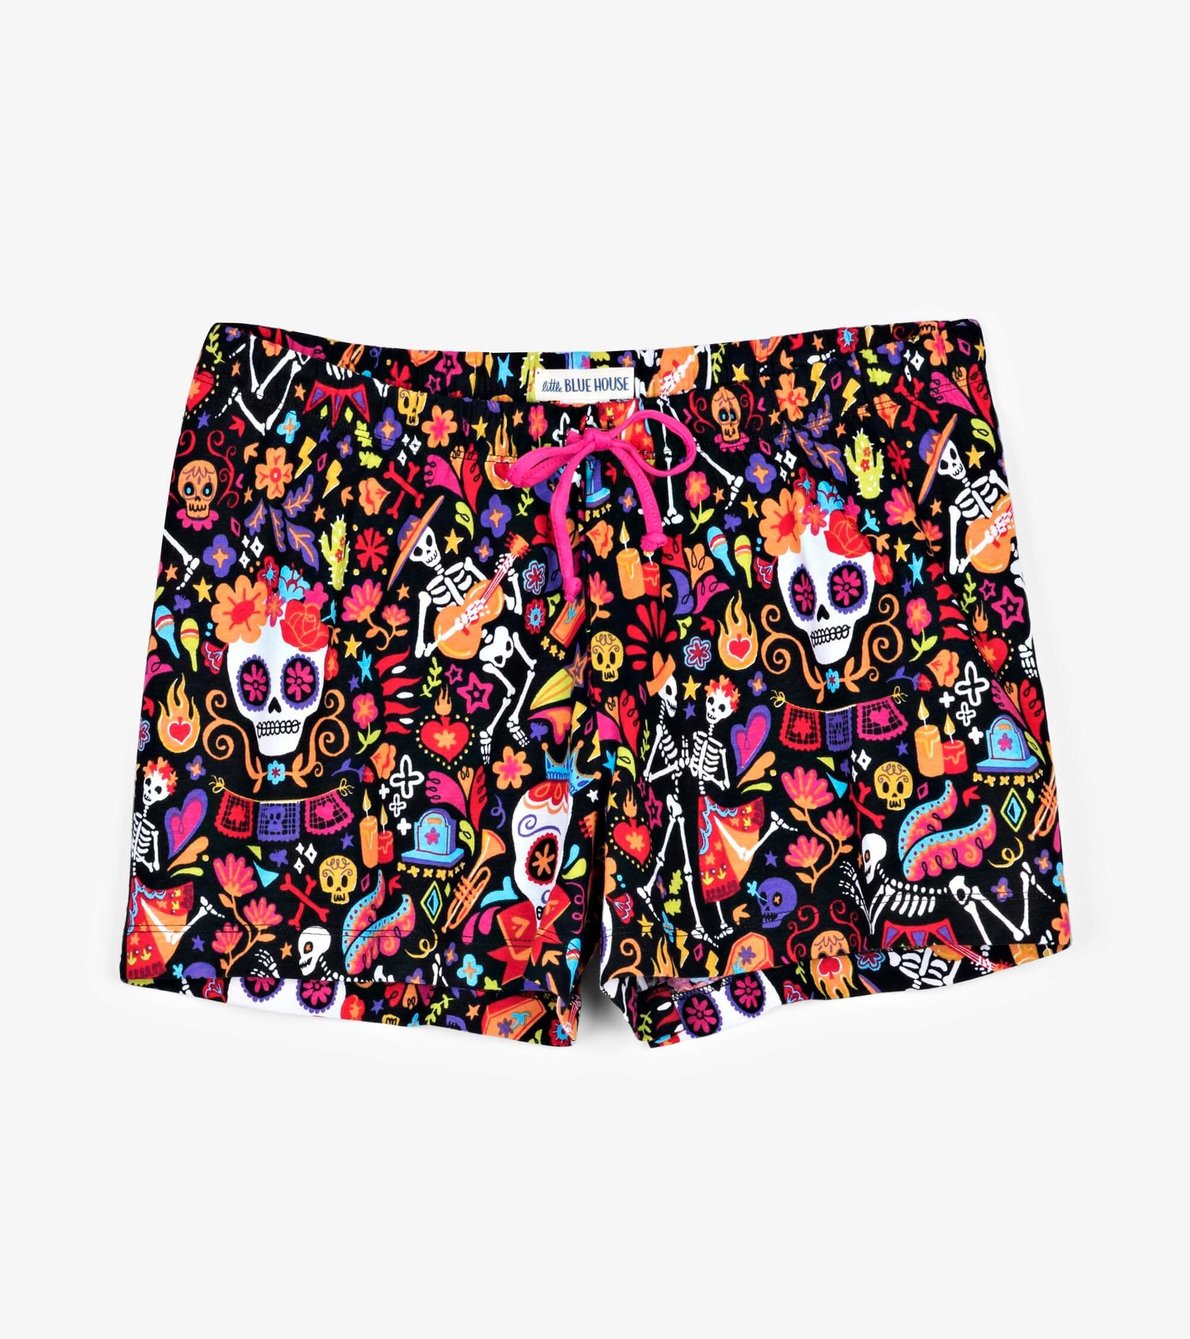 View larger image of "Day Of The Dead" Women's Sleep Shorts